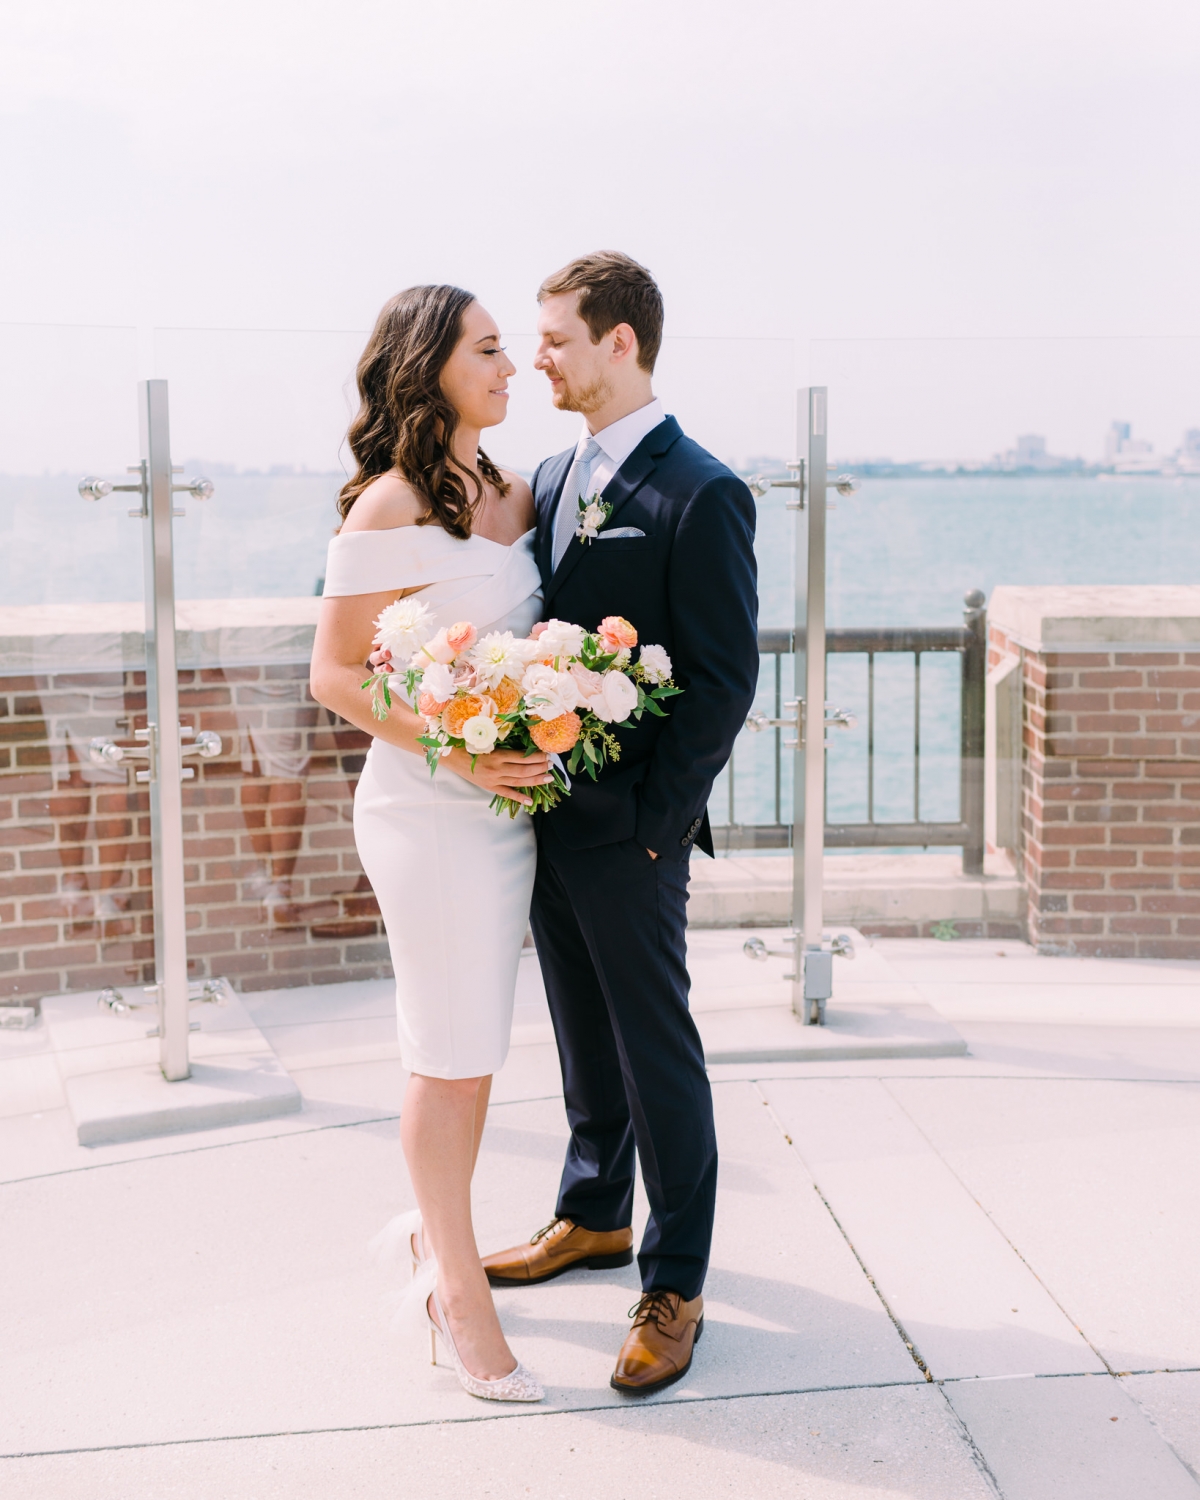 Romantic Rooftop Elopement at Offshore Chicago